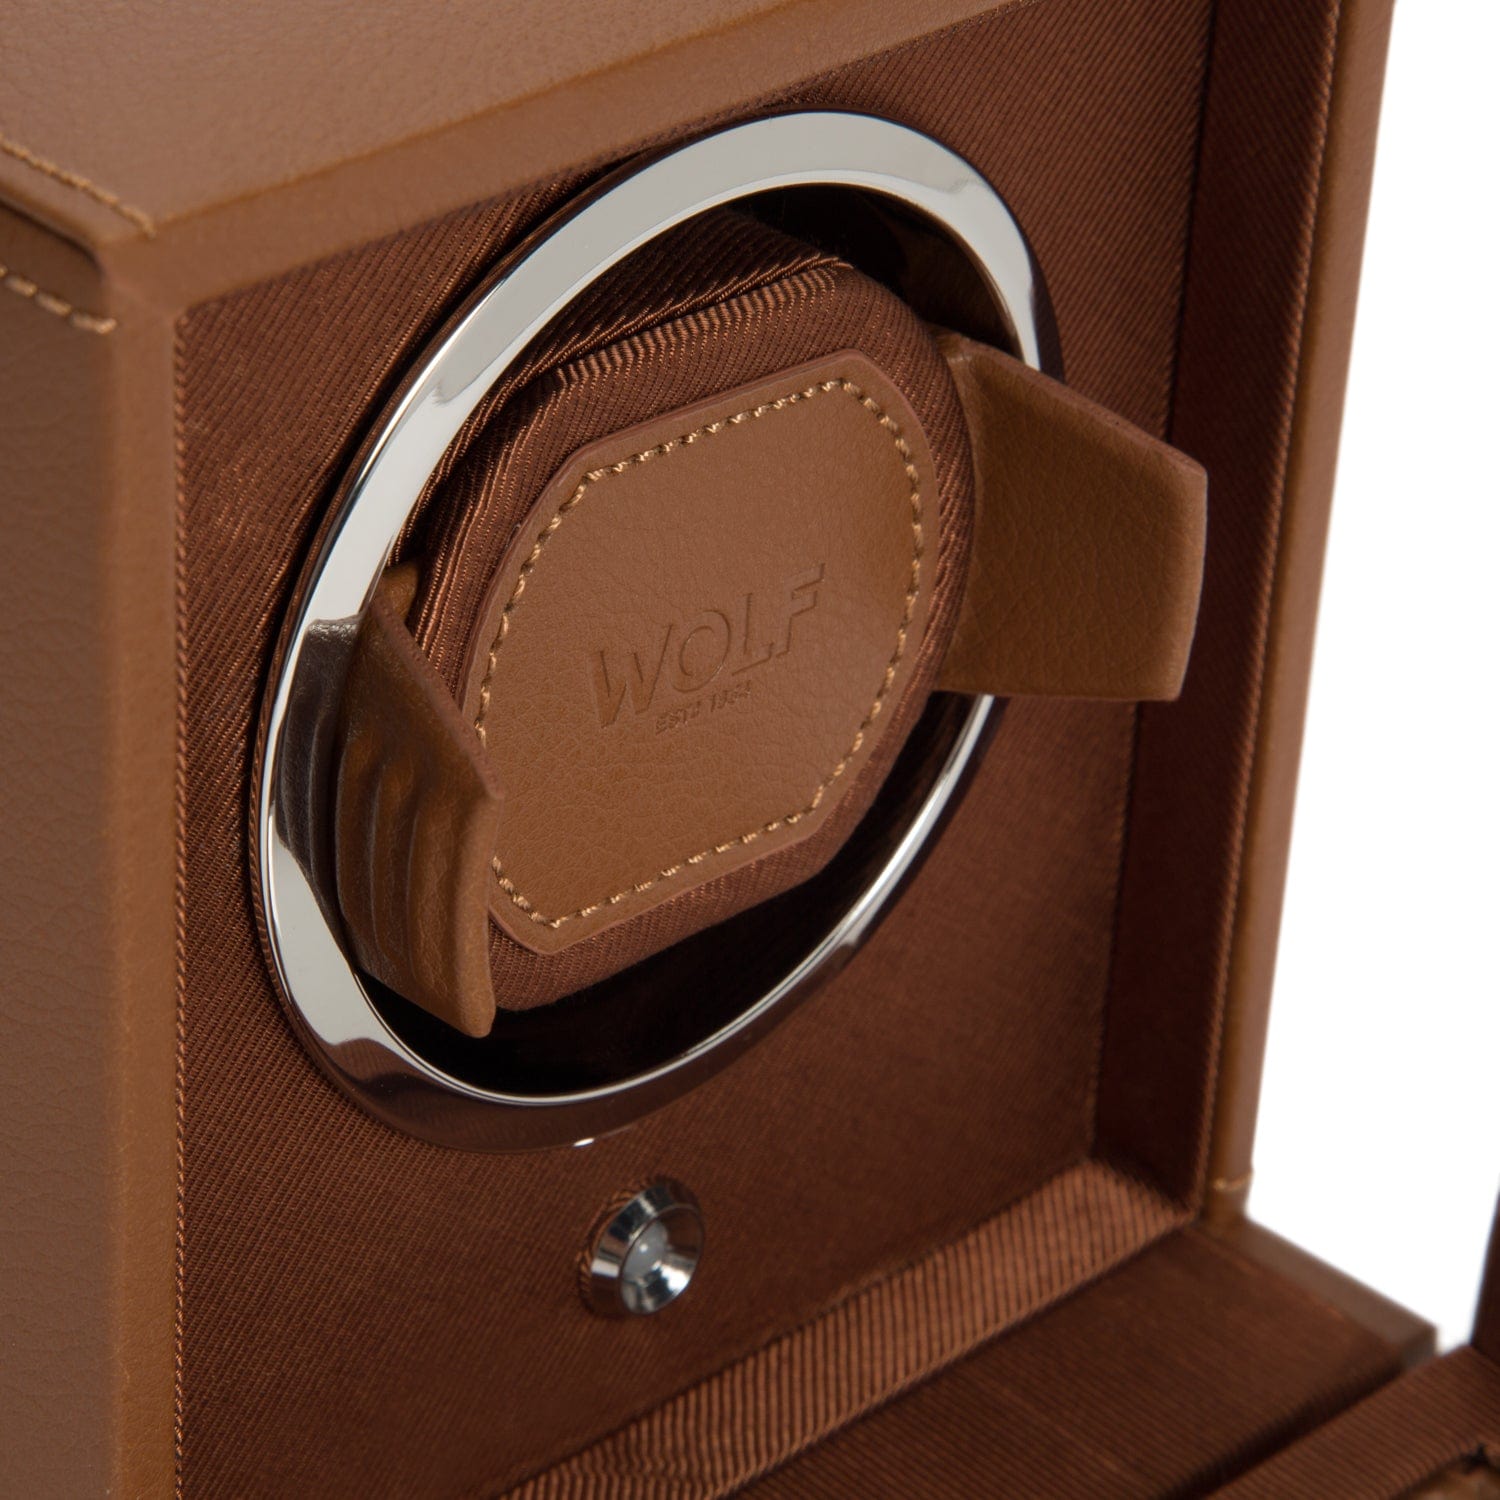 Wolf1834 Watch Winder Cub Single Watch Winder with Cover- Cognac